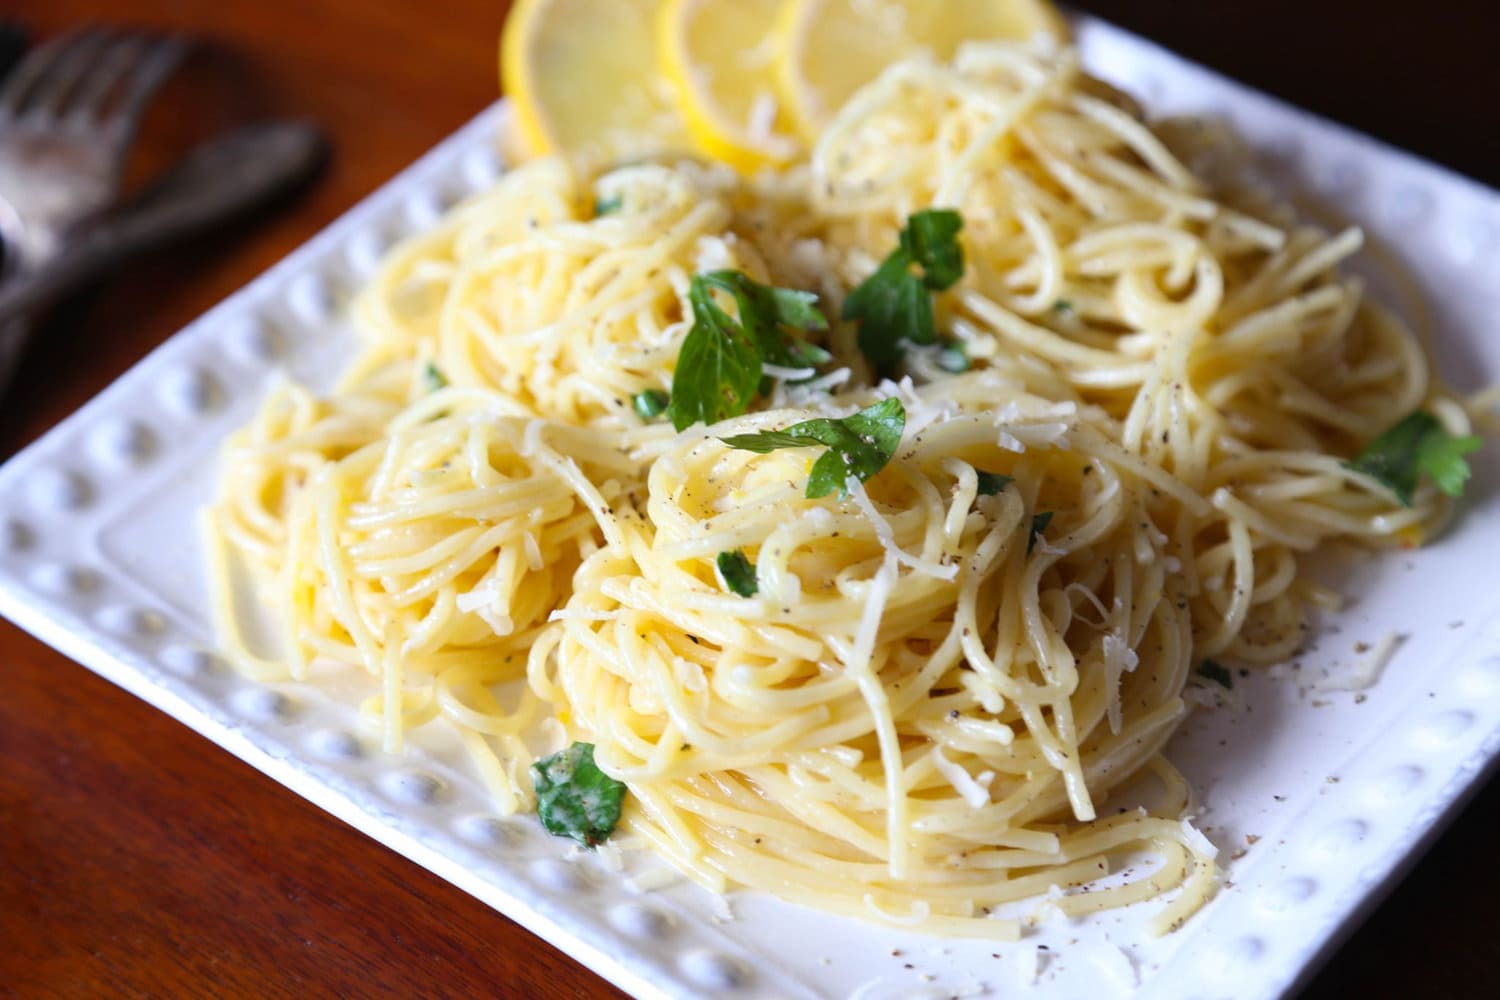 Lemon spaghetti served on a plate, garnished with fresh herbs and lemon slices.